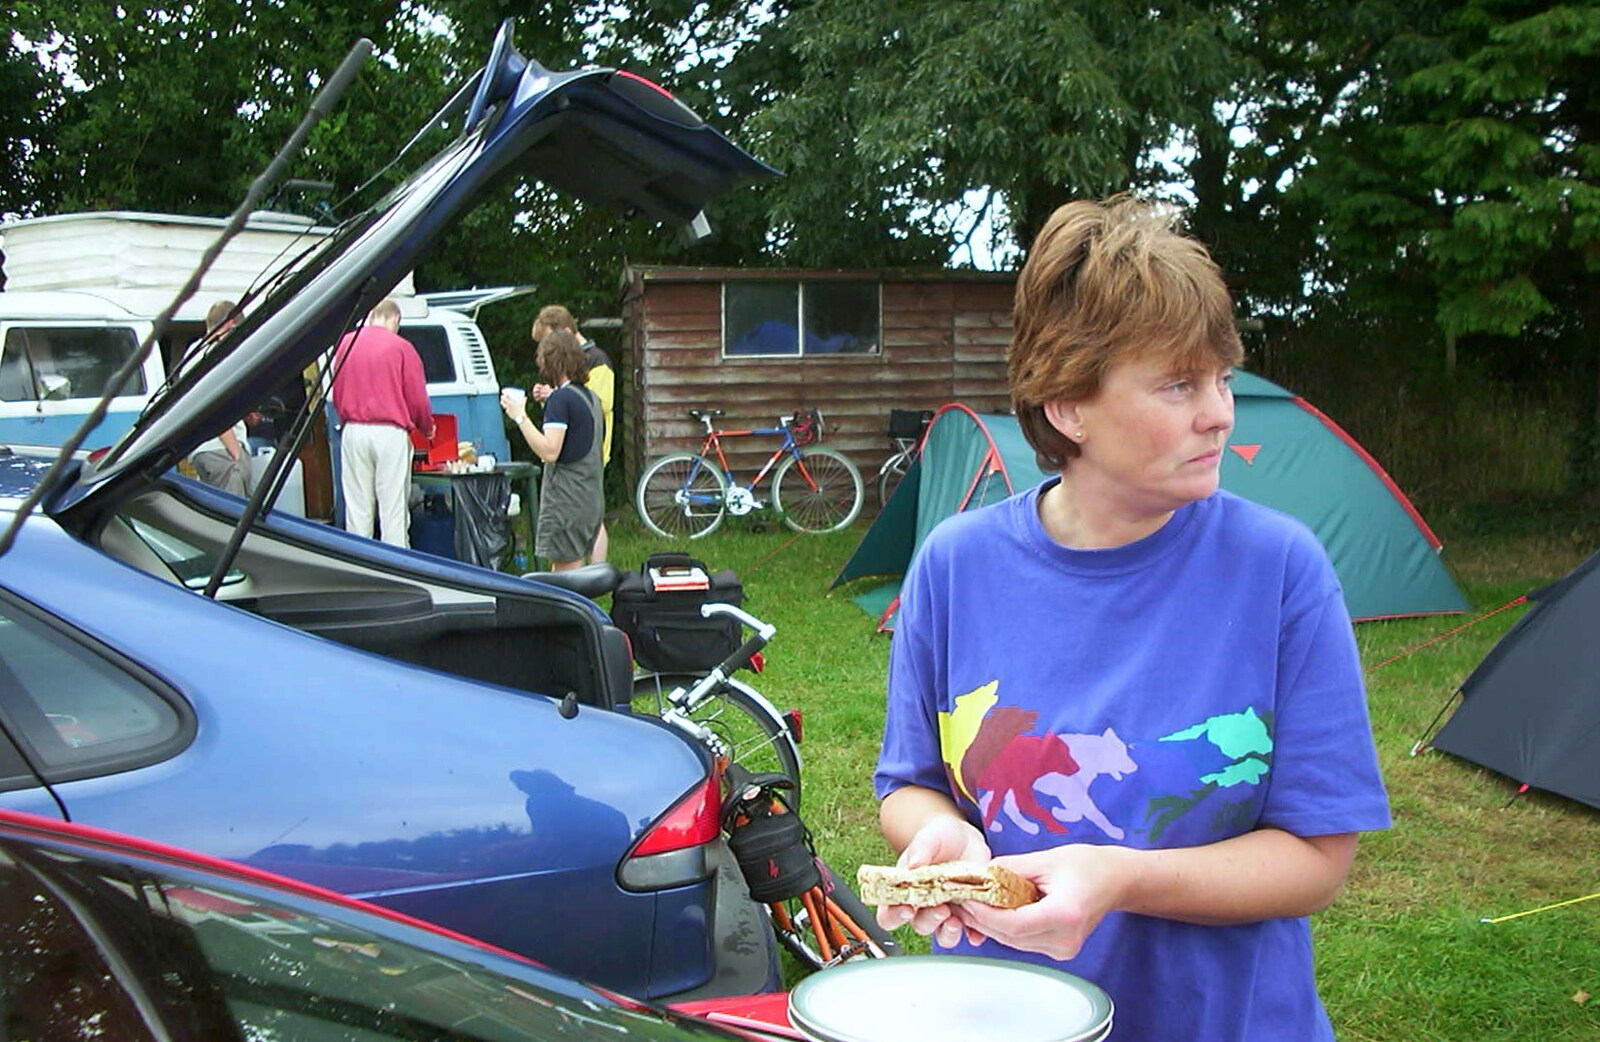 A BSCC Splinter Group Camping Weekend, Theberton, Suffolk - 11th August 2002: Pippa checks if the coast is clear